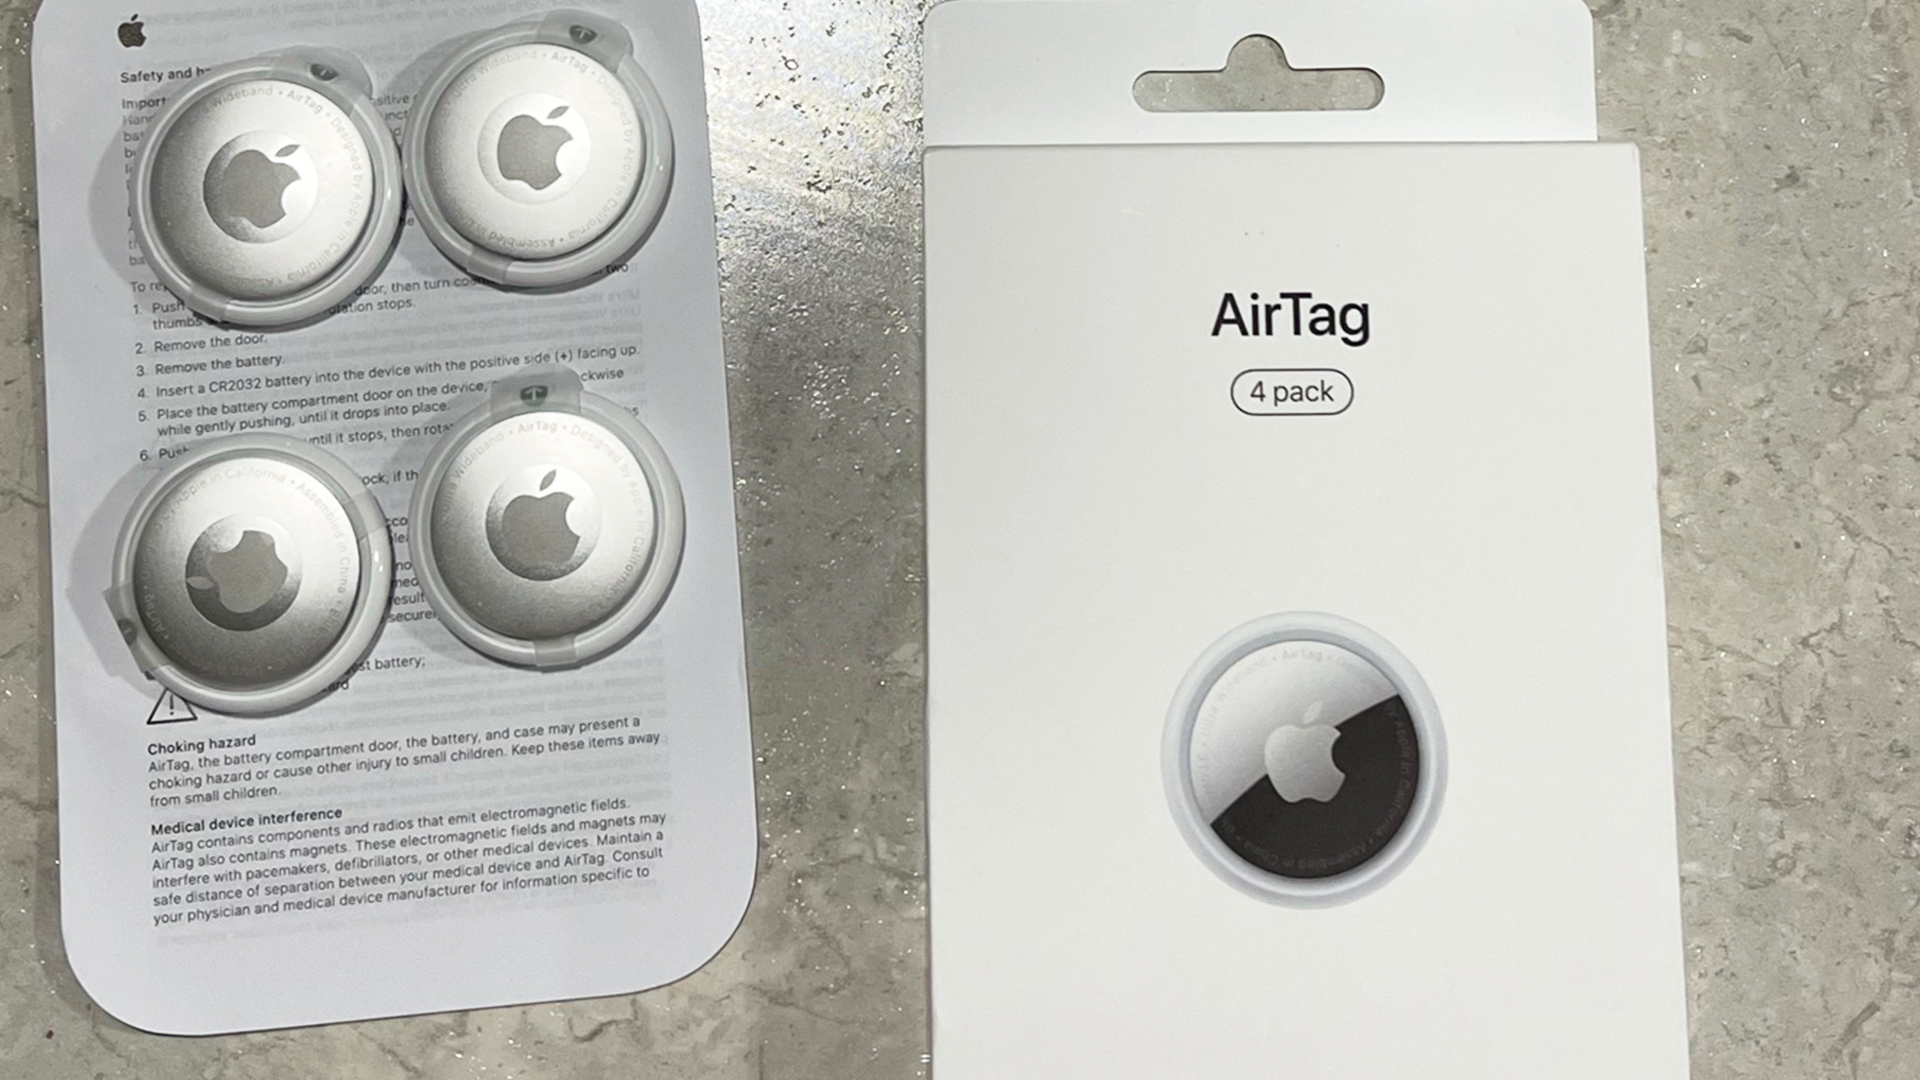 First AirTag shipment arrives early for lucky pre-order customer - 9to5Mac